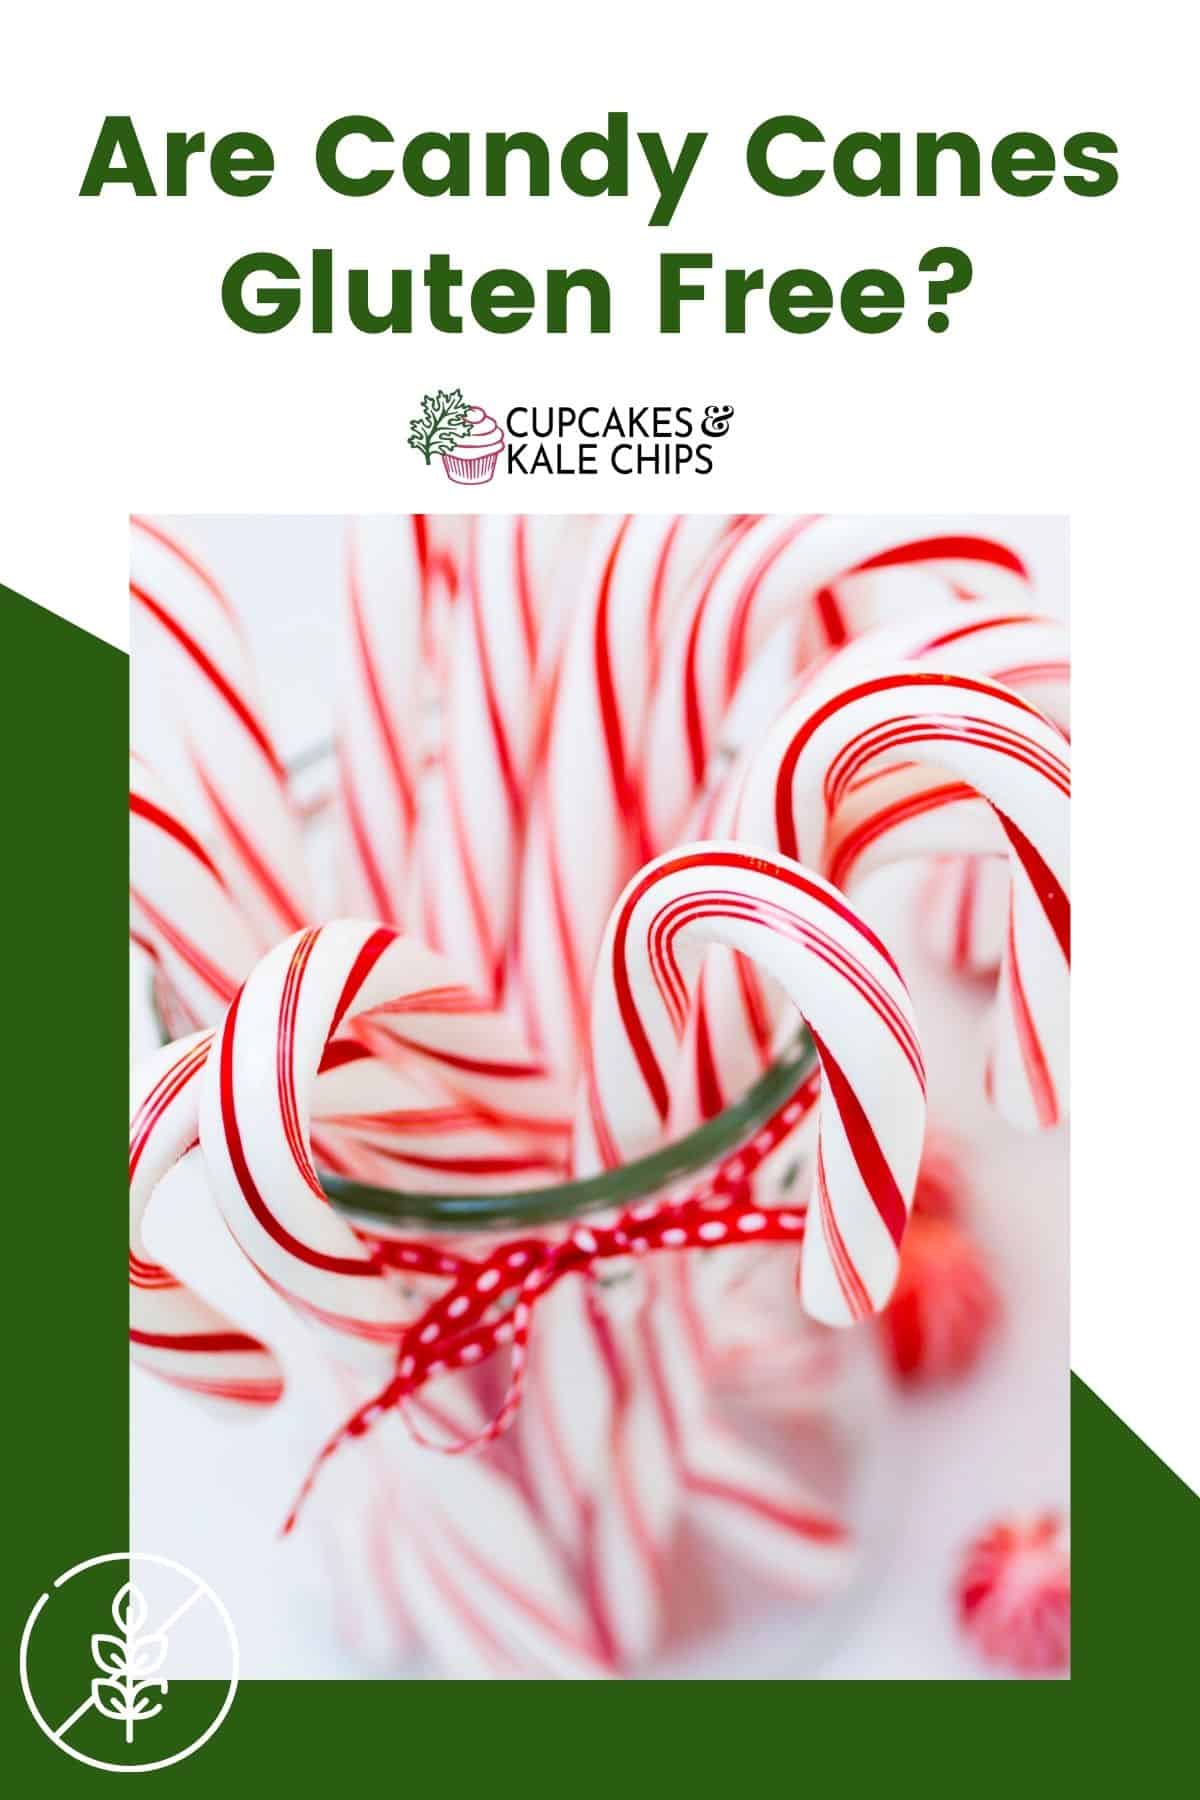 A photo of candy canes in a jar on a green and white background with text overlay that says "Are Candy Canes Gluten Free?".